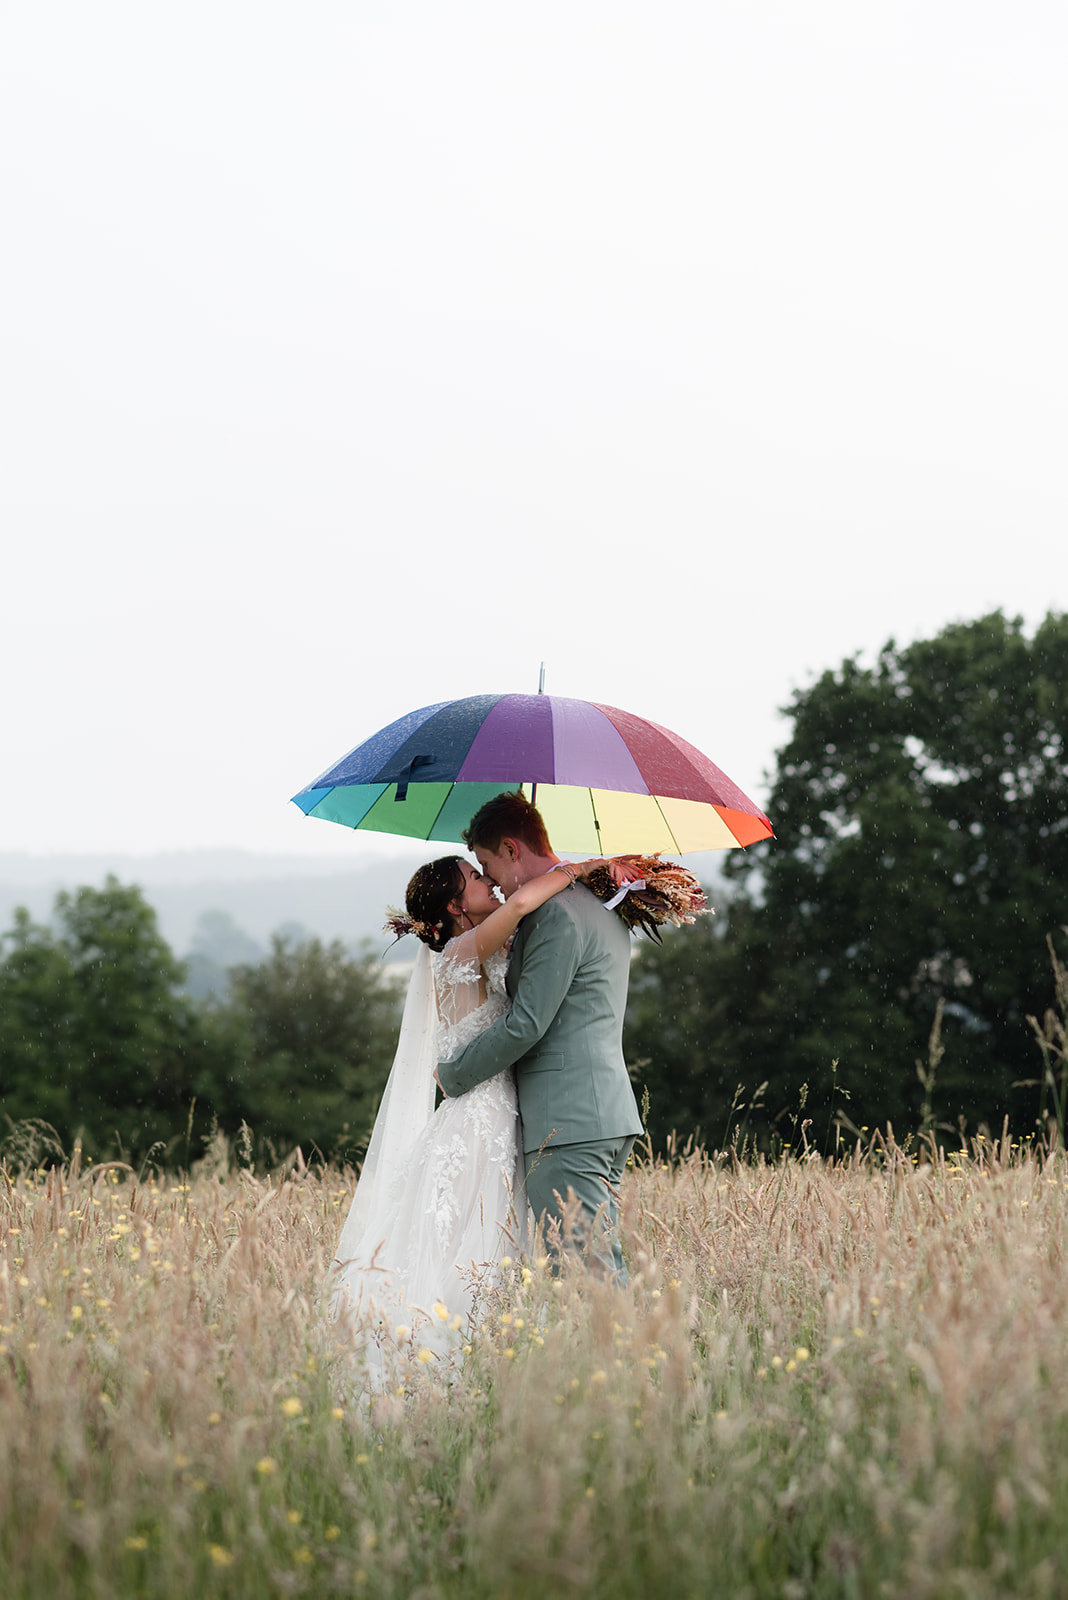 a couple who nestled under an umbrella in the rain 